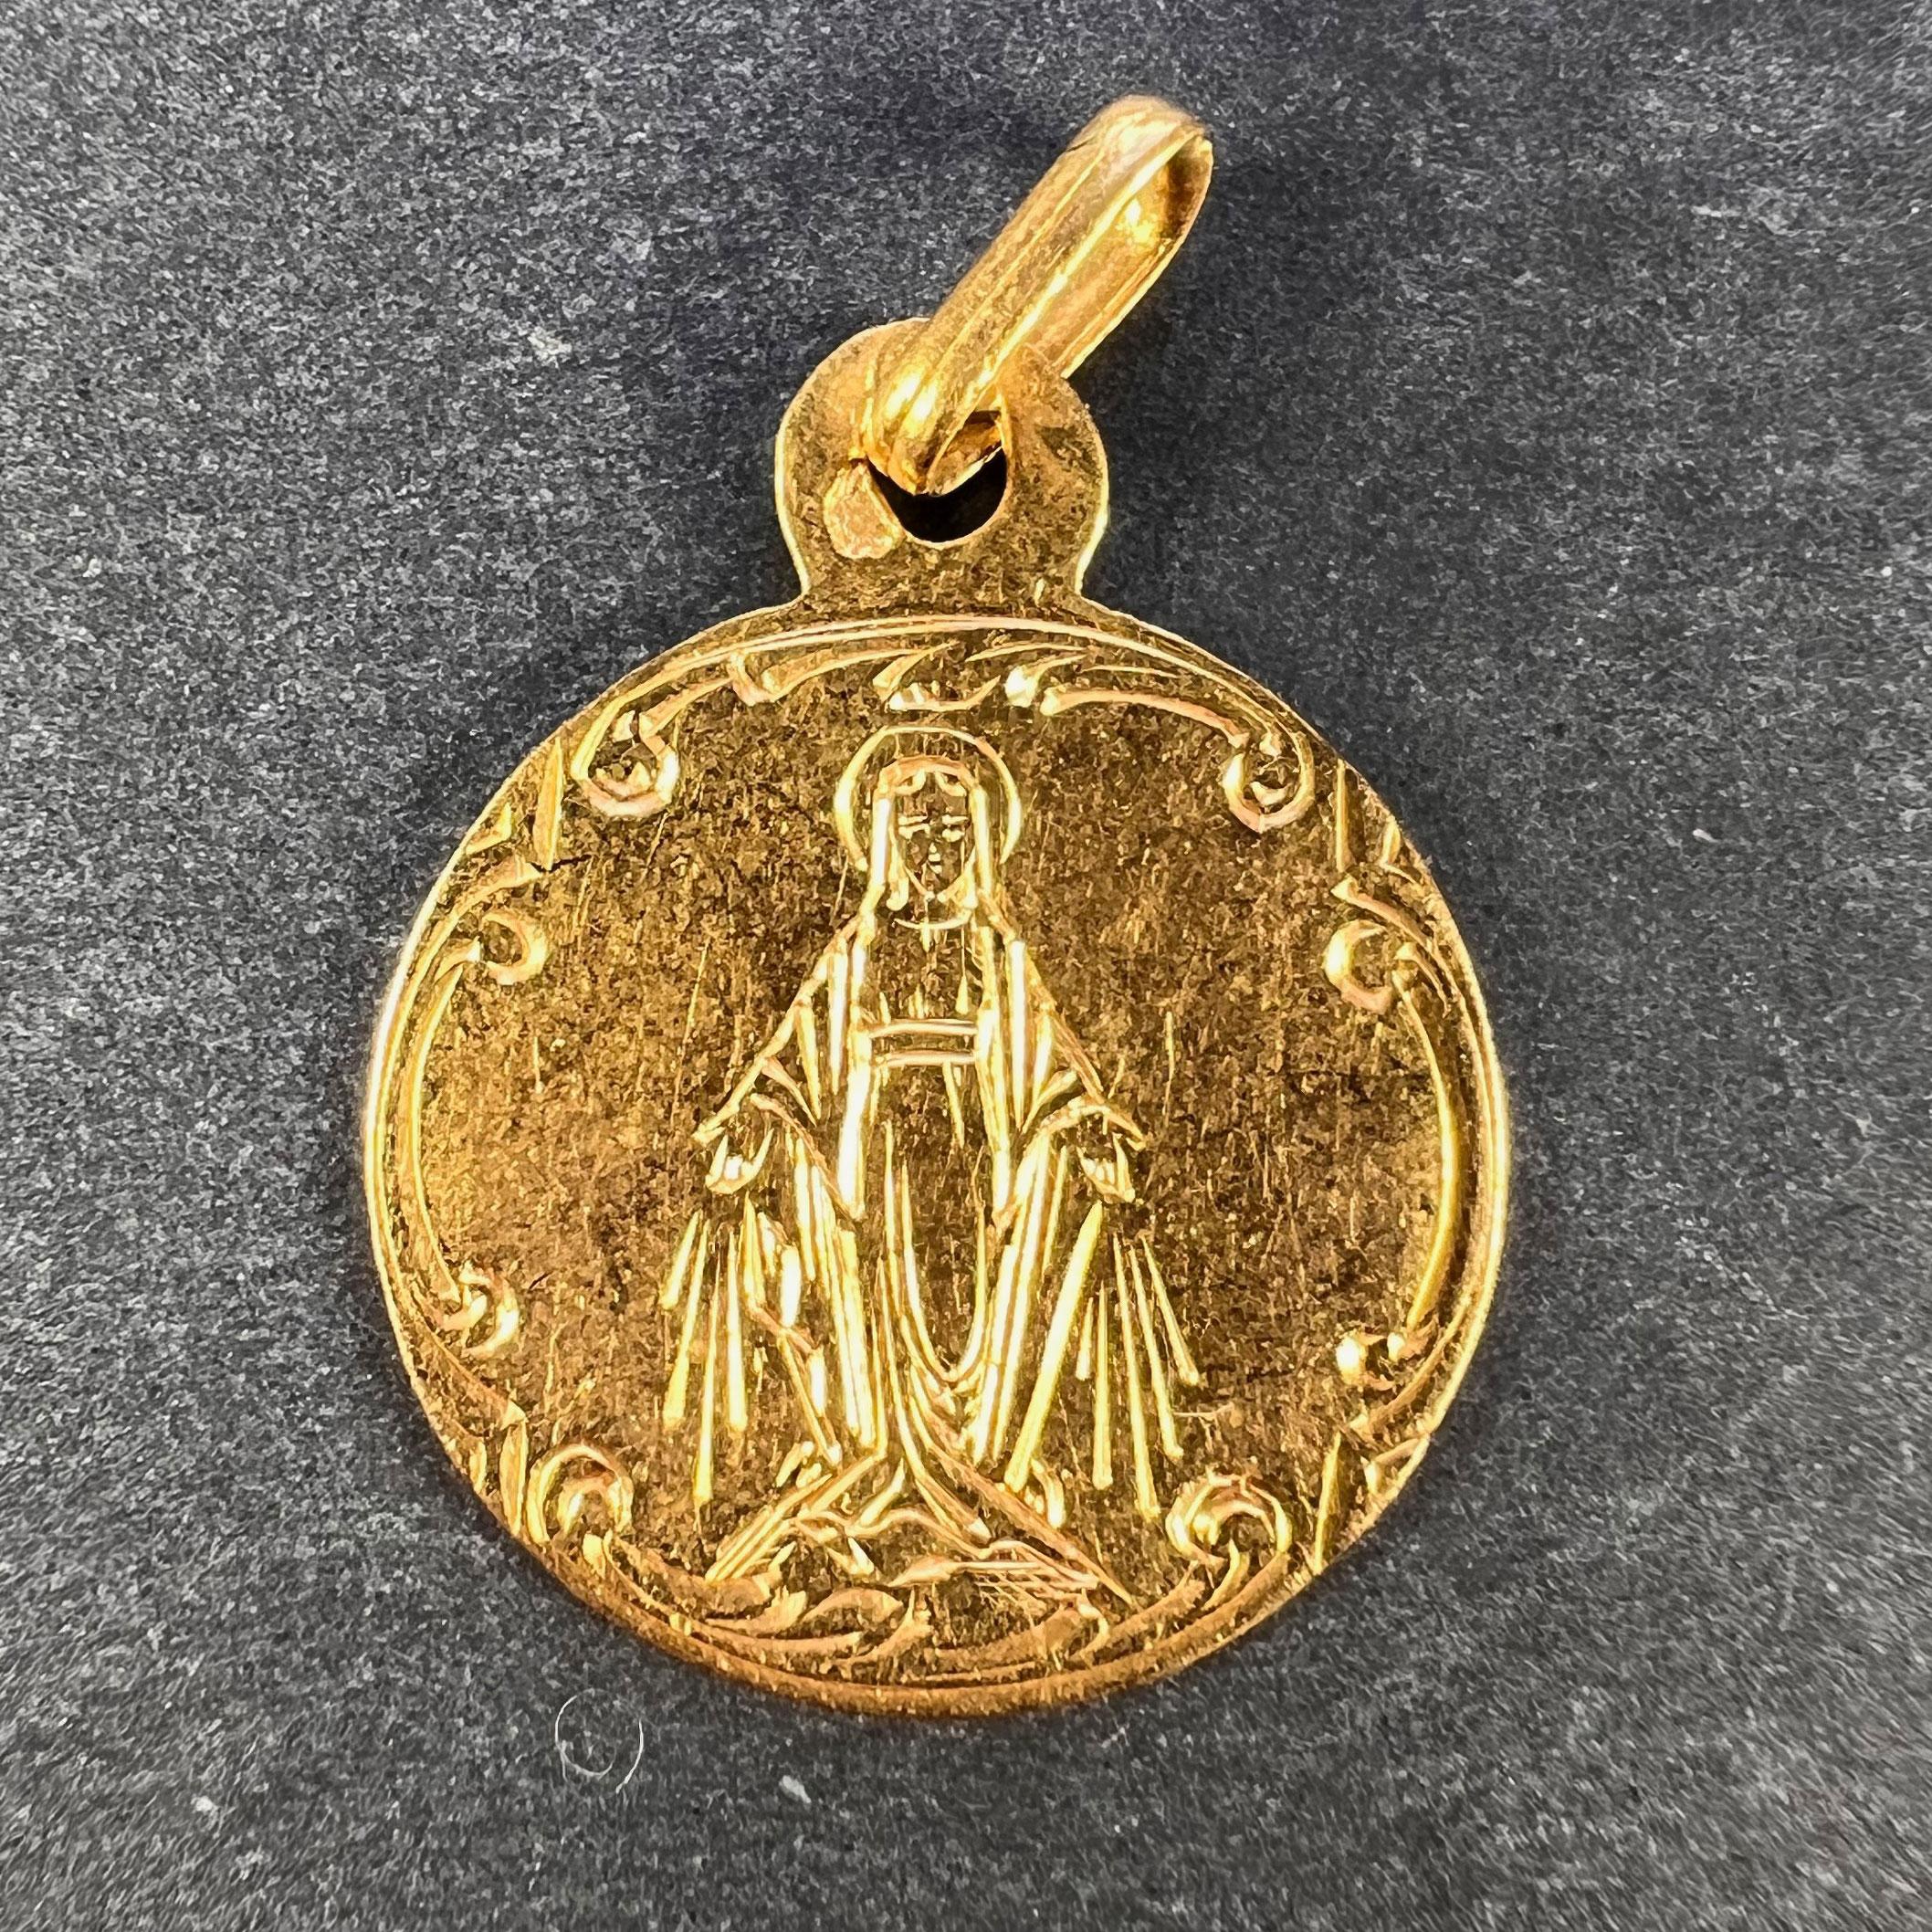 A French 18 karat (18K) yellow gold charm pendant designed as a round medal engraved with the Virgin Mary. Engraved to the reverse with the monogram BG and dated '29 Mars 1900'. Stamped with the eagle's head for 18 karat gold and French manufacture,